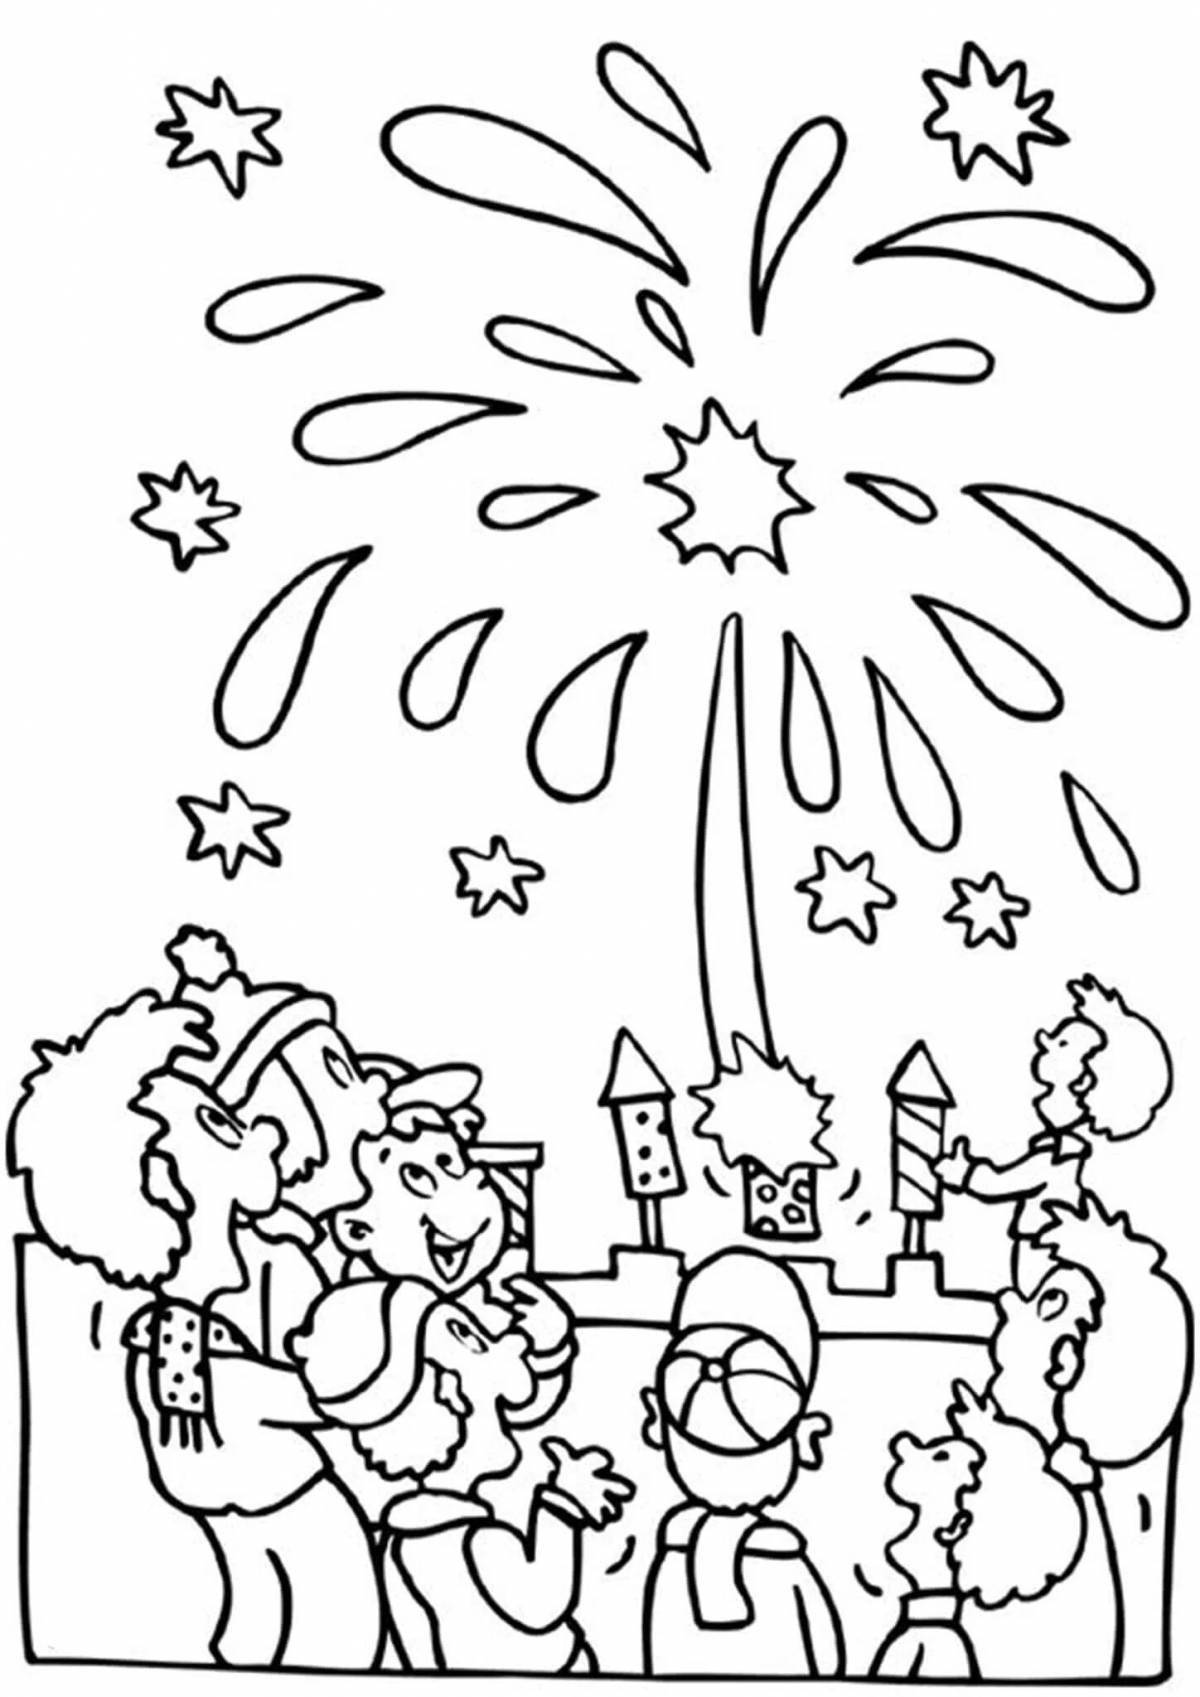 Coloring book gorgeous new year holidays